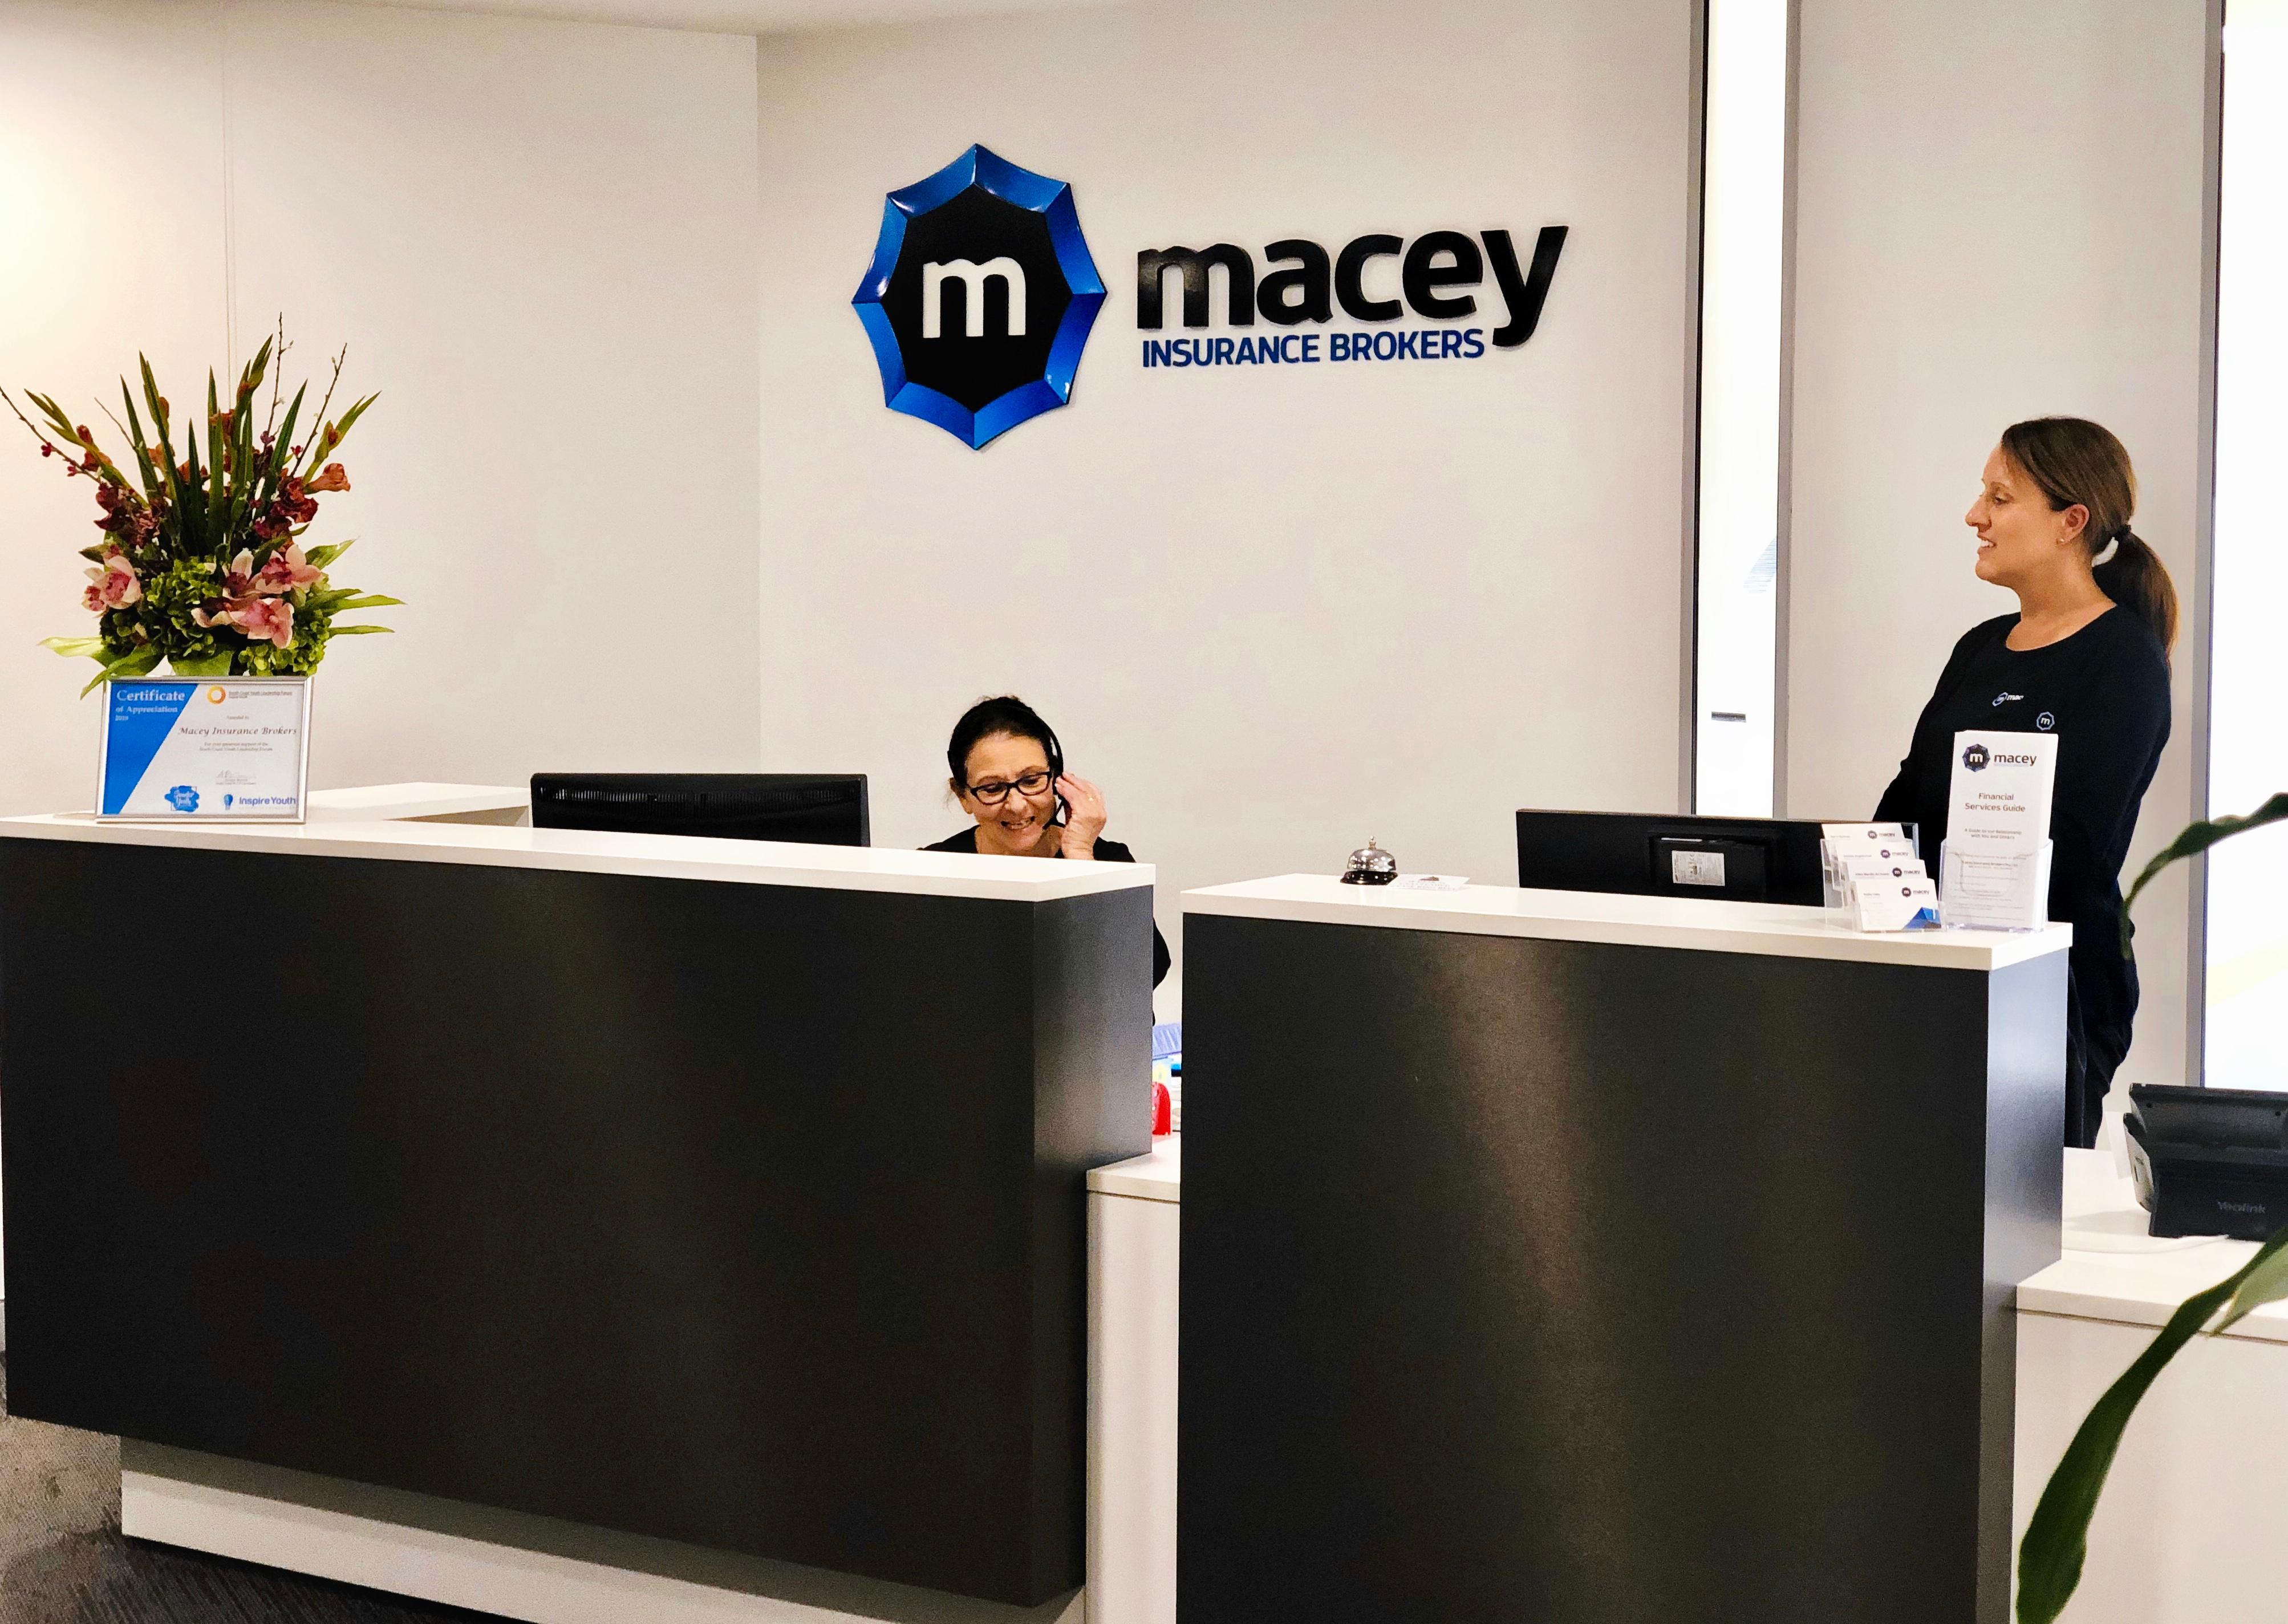 Images Macey Insurance Brokers Pty Ltd